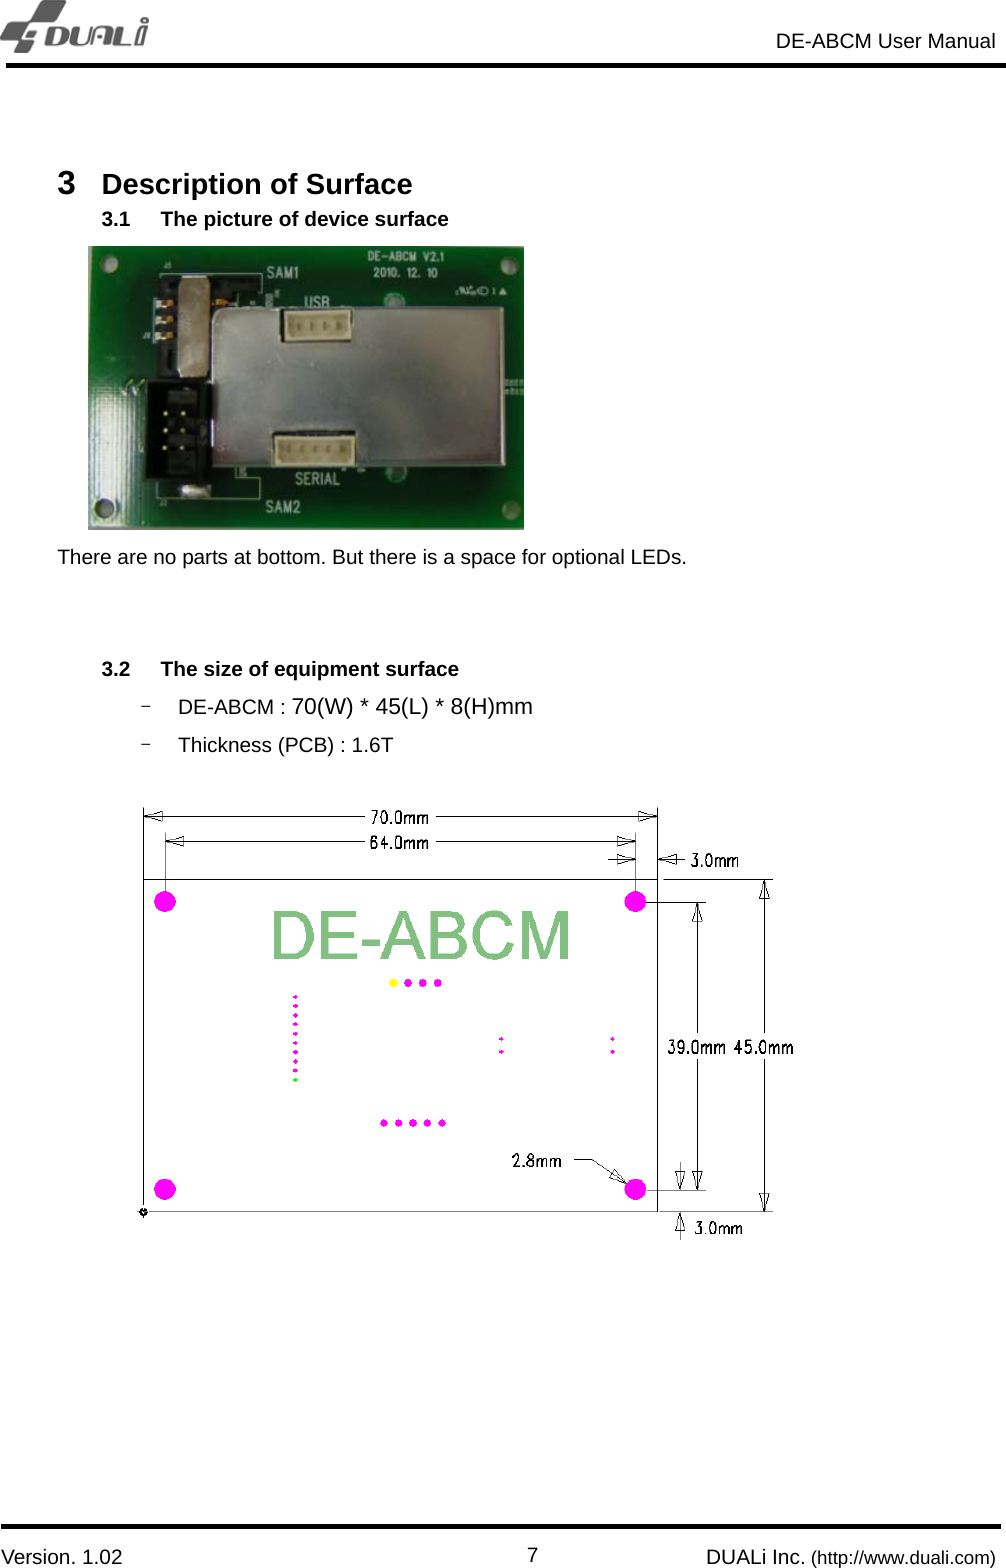                                                                       DE-ABCM User Manual                            Version. 1.02                                                        DUALi Inc. (http://www.duali.com)  7 3  Description of Surface 3.1  The picture of device surface        There are no parts at bottom. But there is a space for optional LEDs.     3.2  The size of equipment surface - DE-ABCM : 70(W) * 45(L) * 8(H)mm -  Thickness (PCB) : 1.6T 